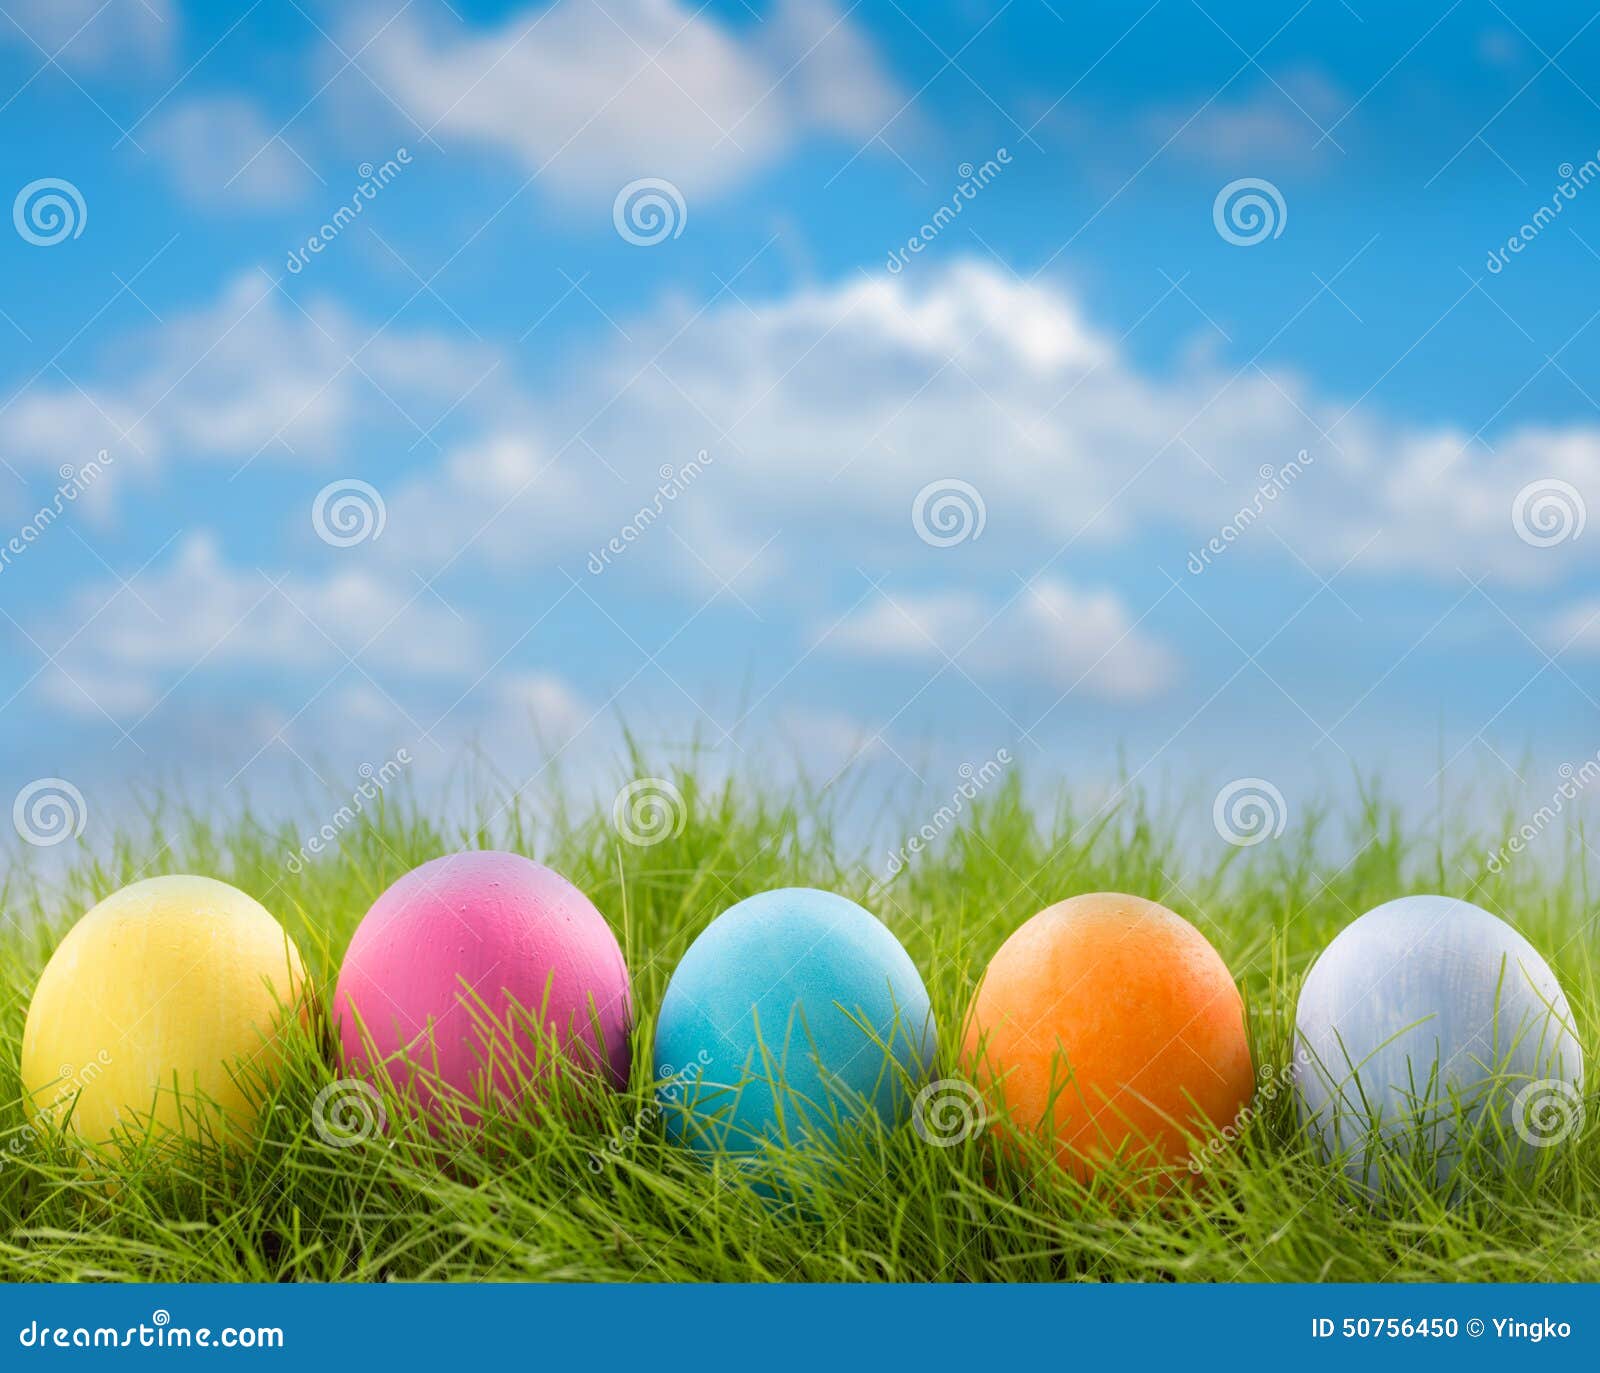 row of easter eggs in grass